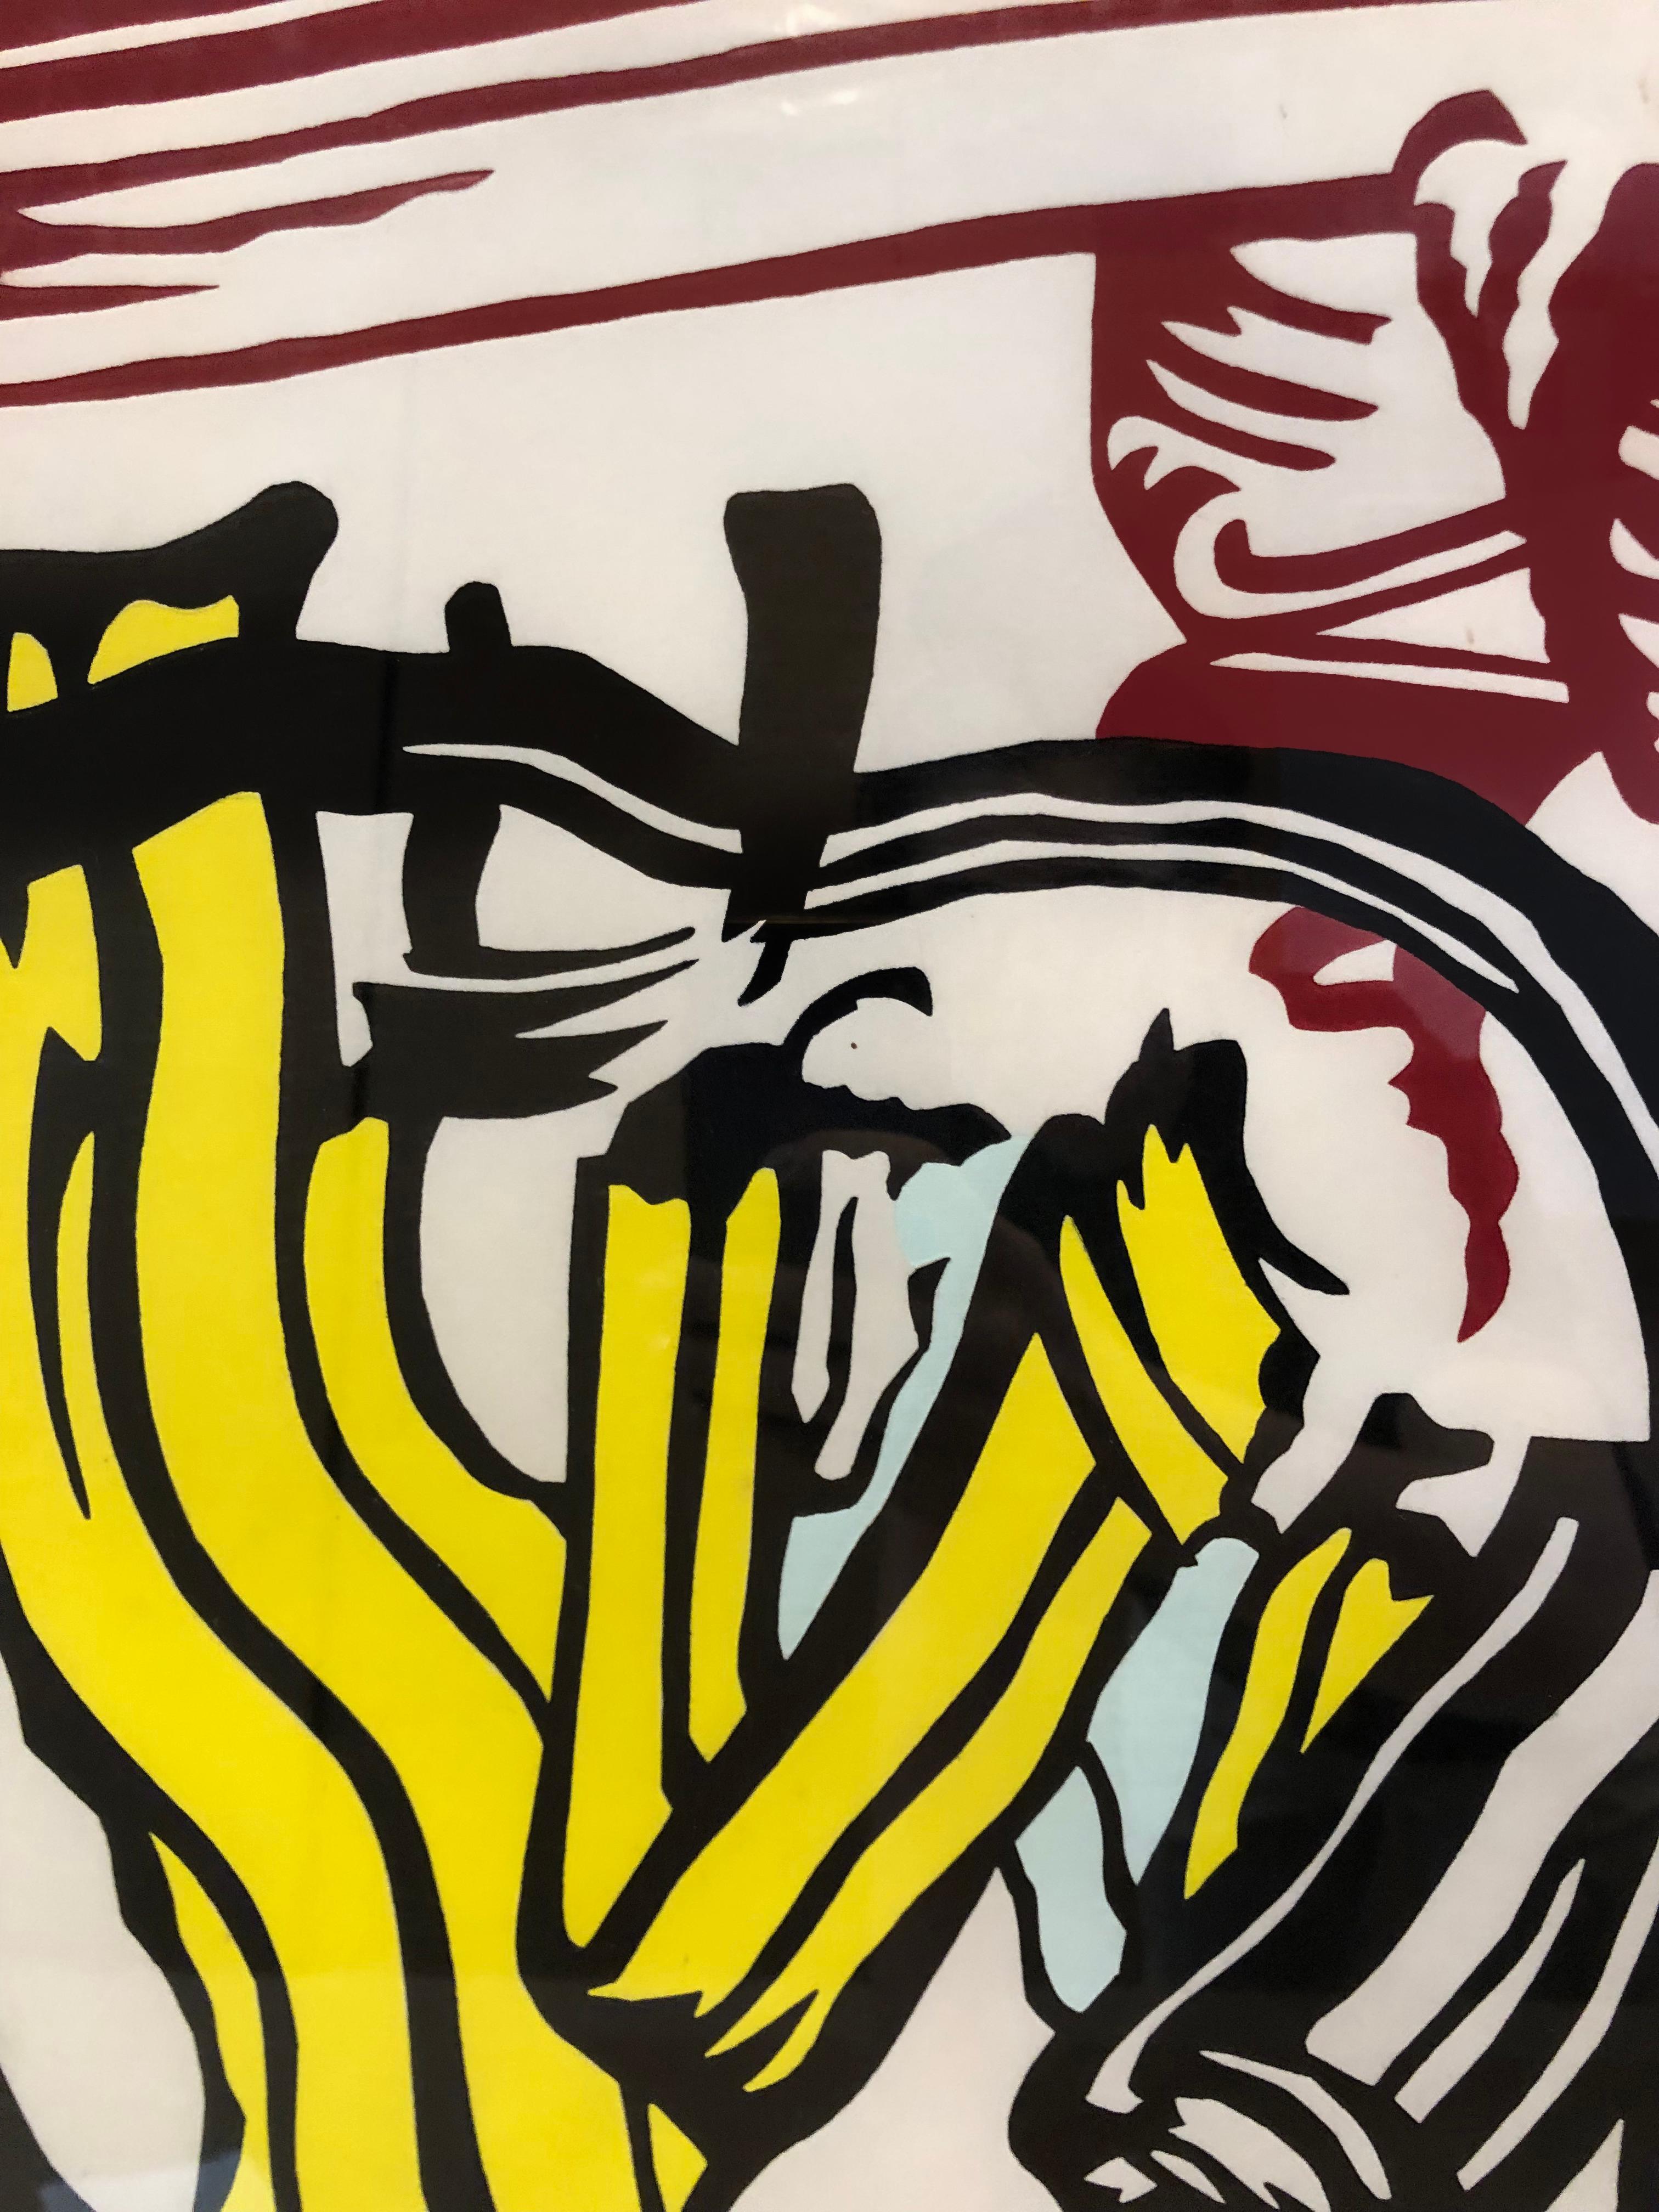 This Roy Lichtenstein woodcut from the Seven Apple Woodcuts portfolio is an electric take on the humble still life. Striated black brushstrokes sketch the outline of two apples, filled with yellow and red from left to right in graphic ribbons of